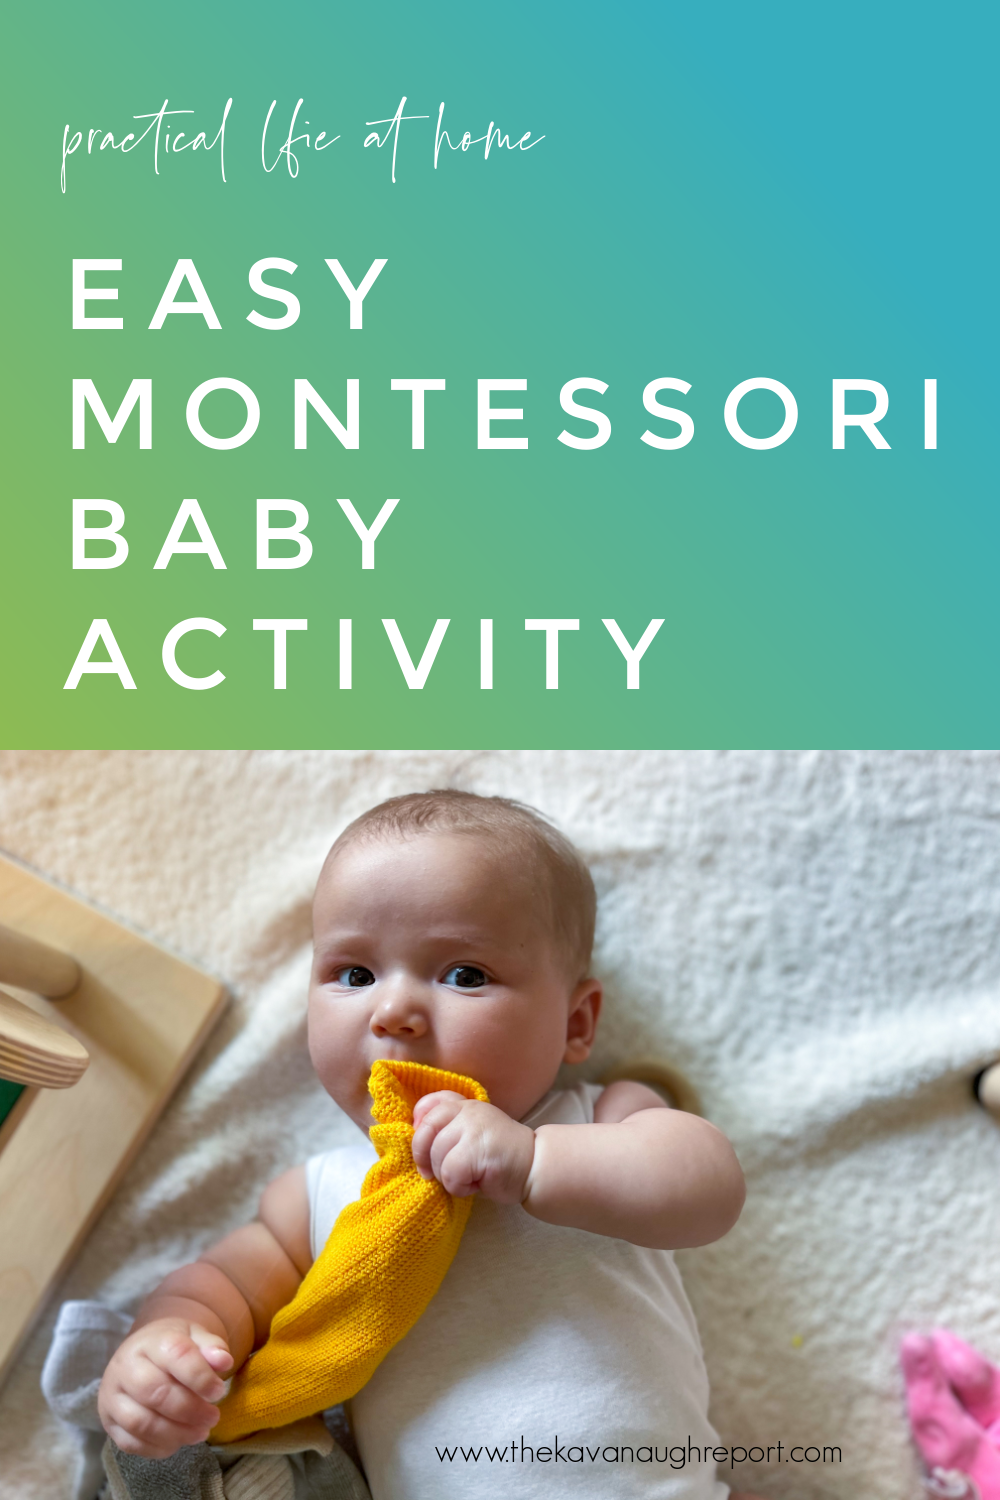 An easy and quick Montessori baby activity to introduce your baby to practical life work through connection and everyday tasks.